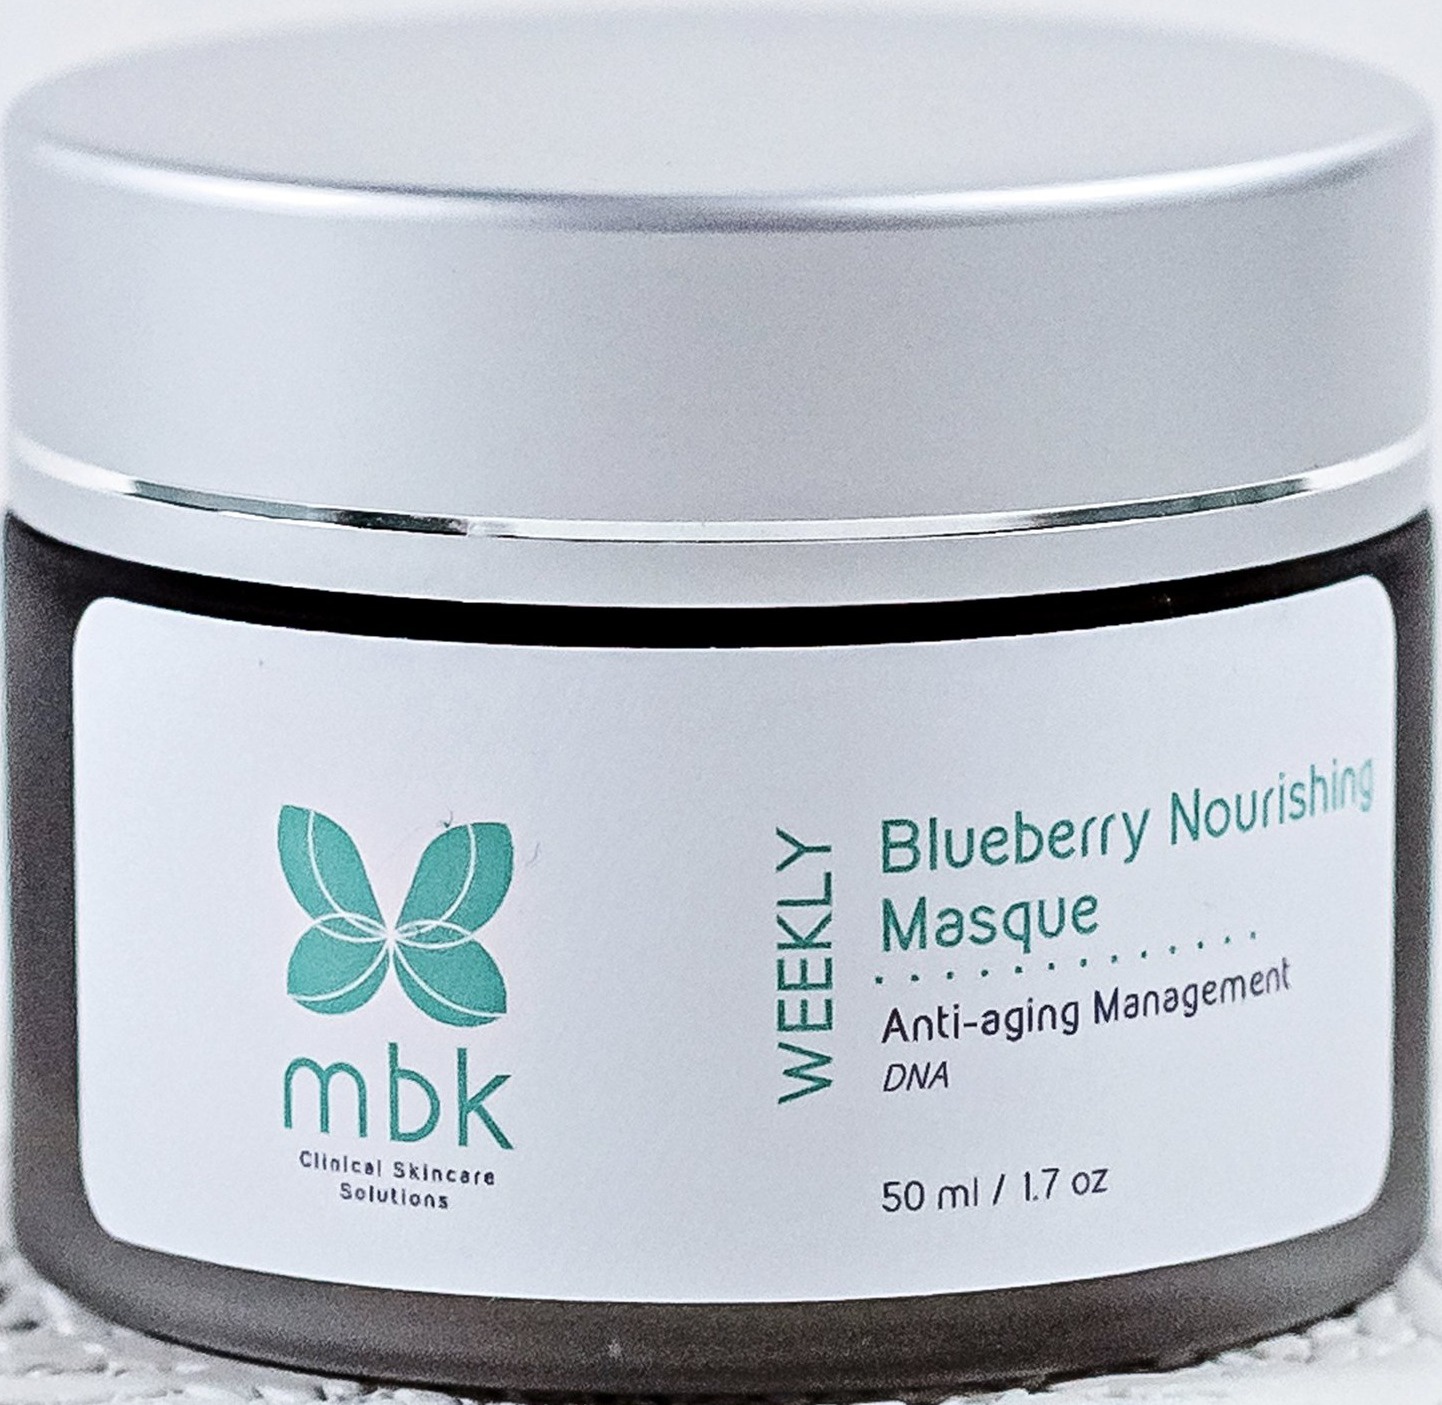 MBK Clinical Skincare Solutions Blueberry Nourishing Masque